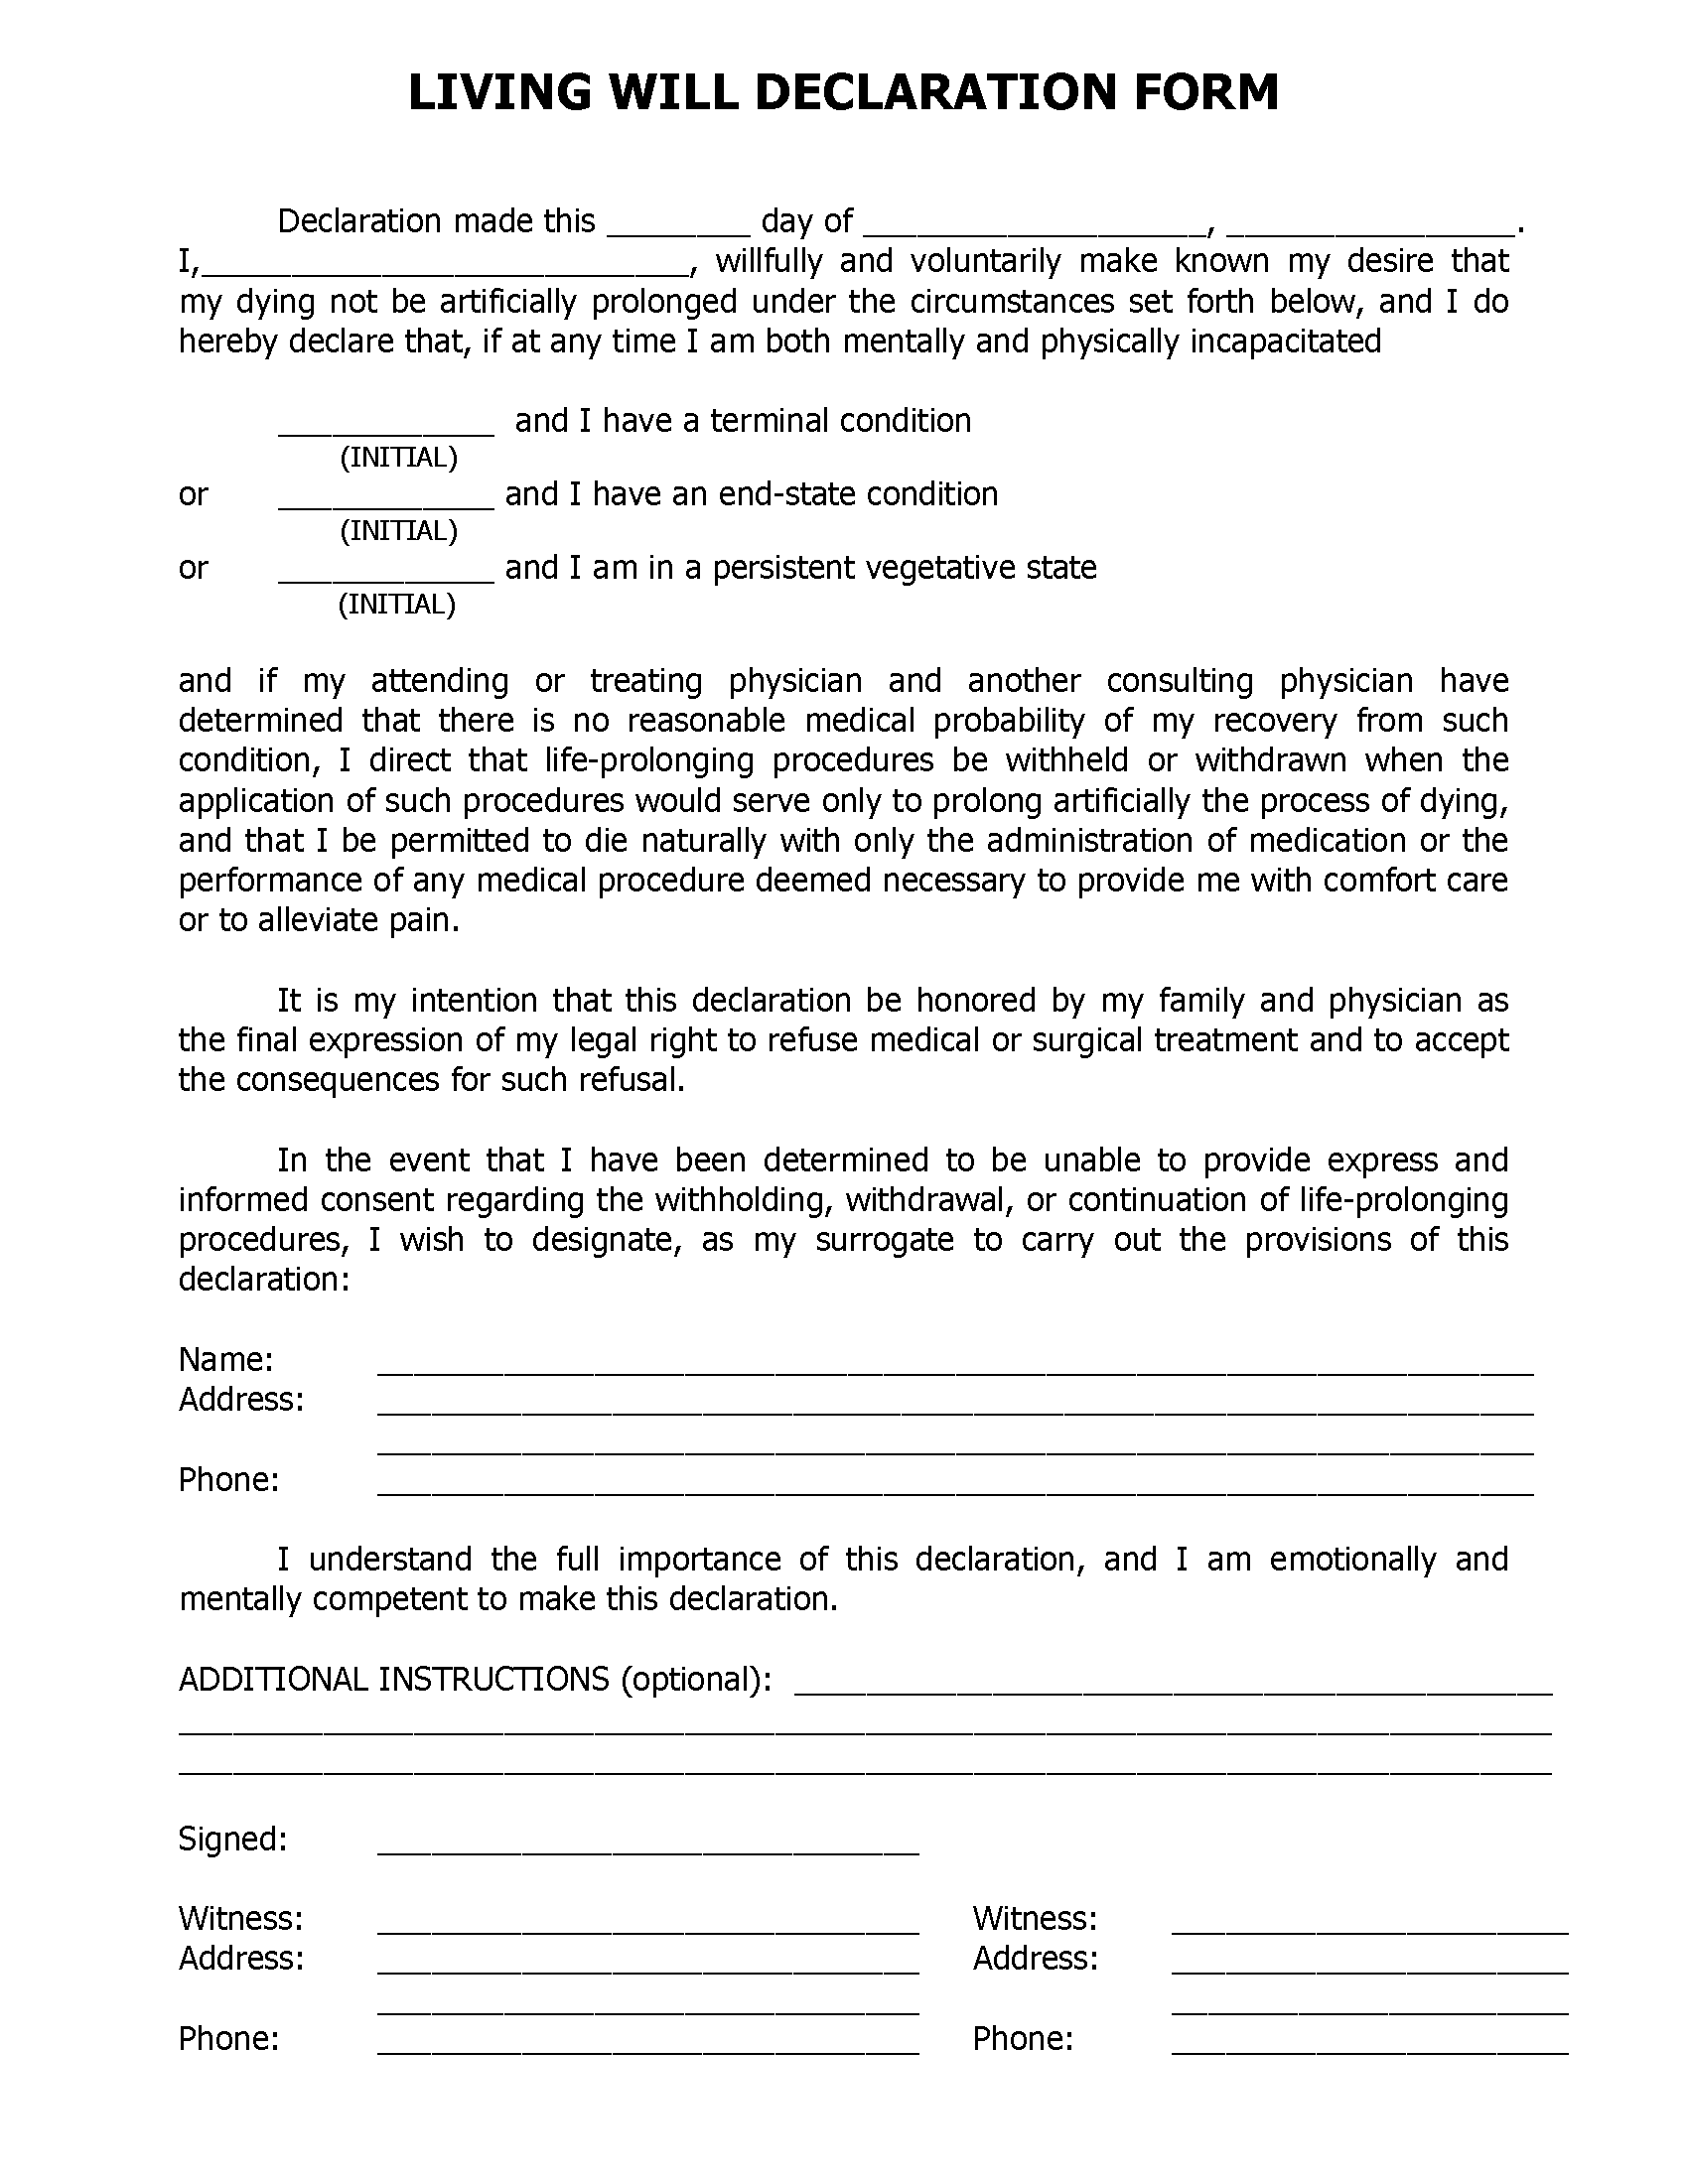 Florida Living Will Form Fillable PDF Free Printable Legal Forms